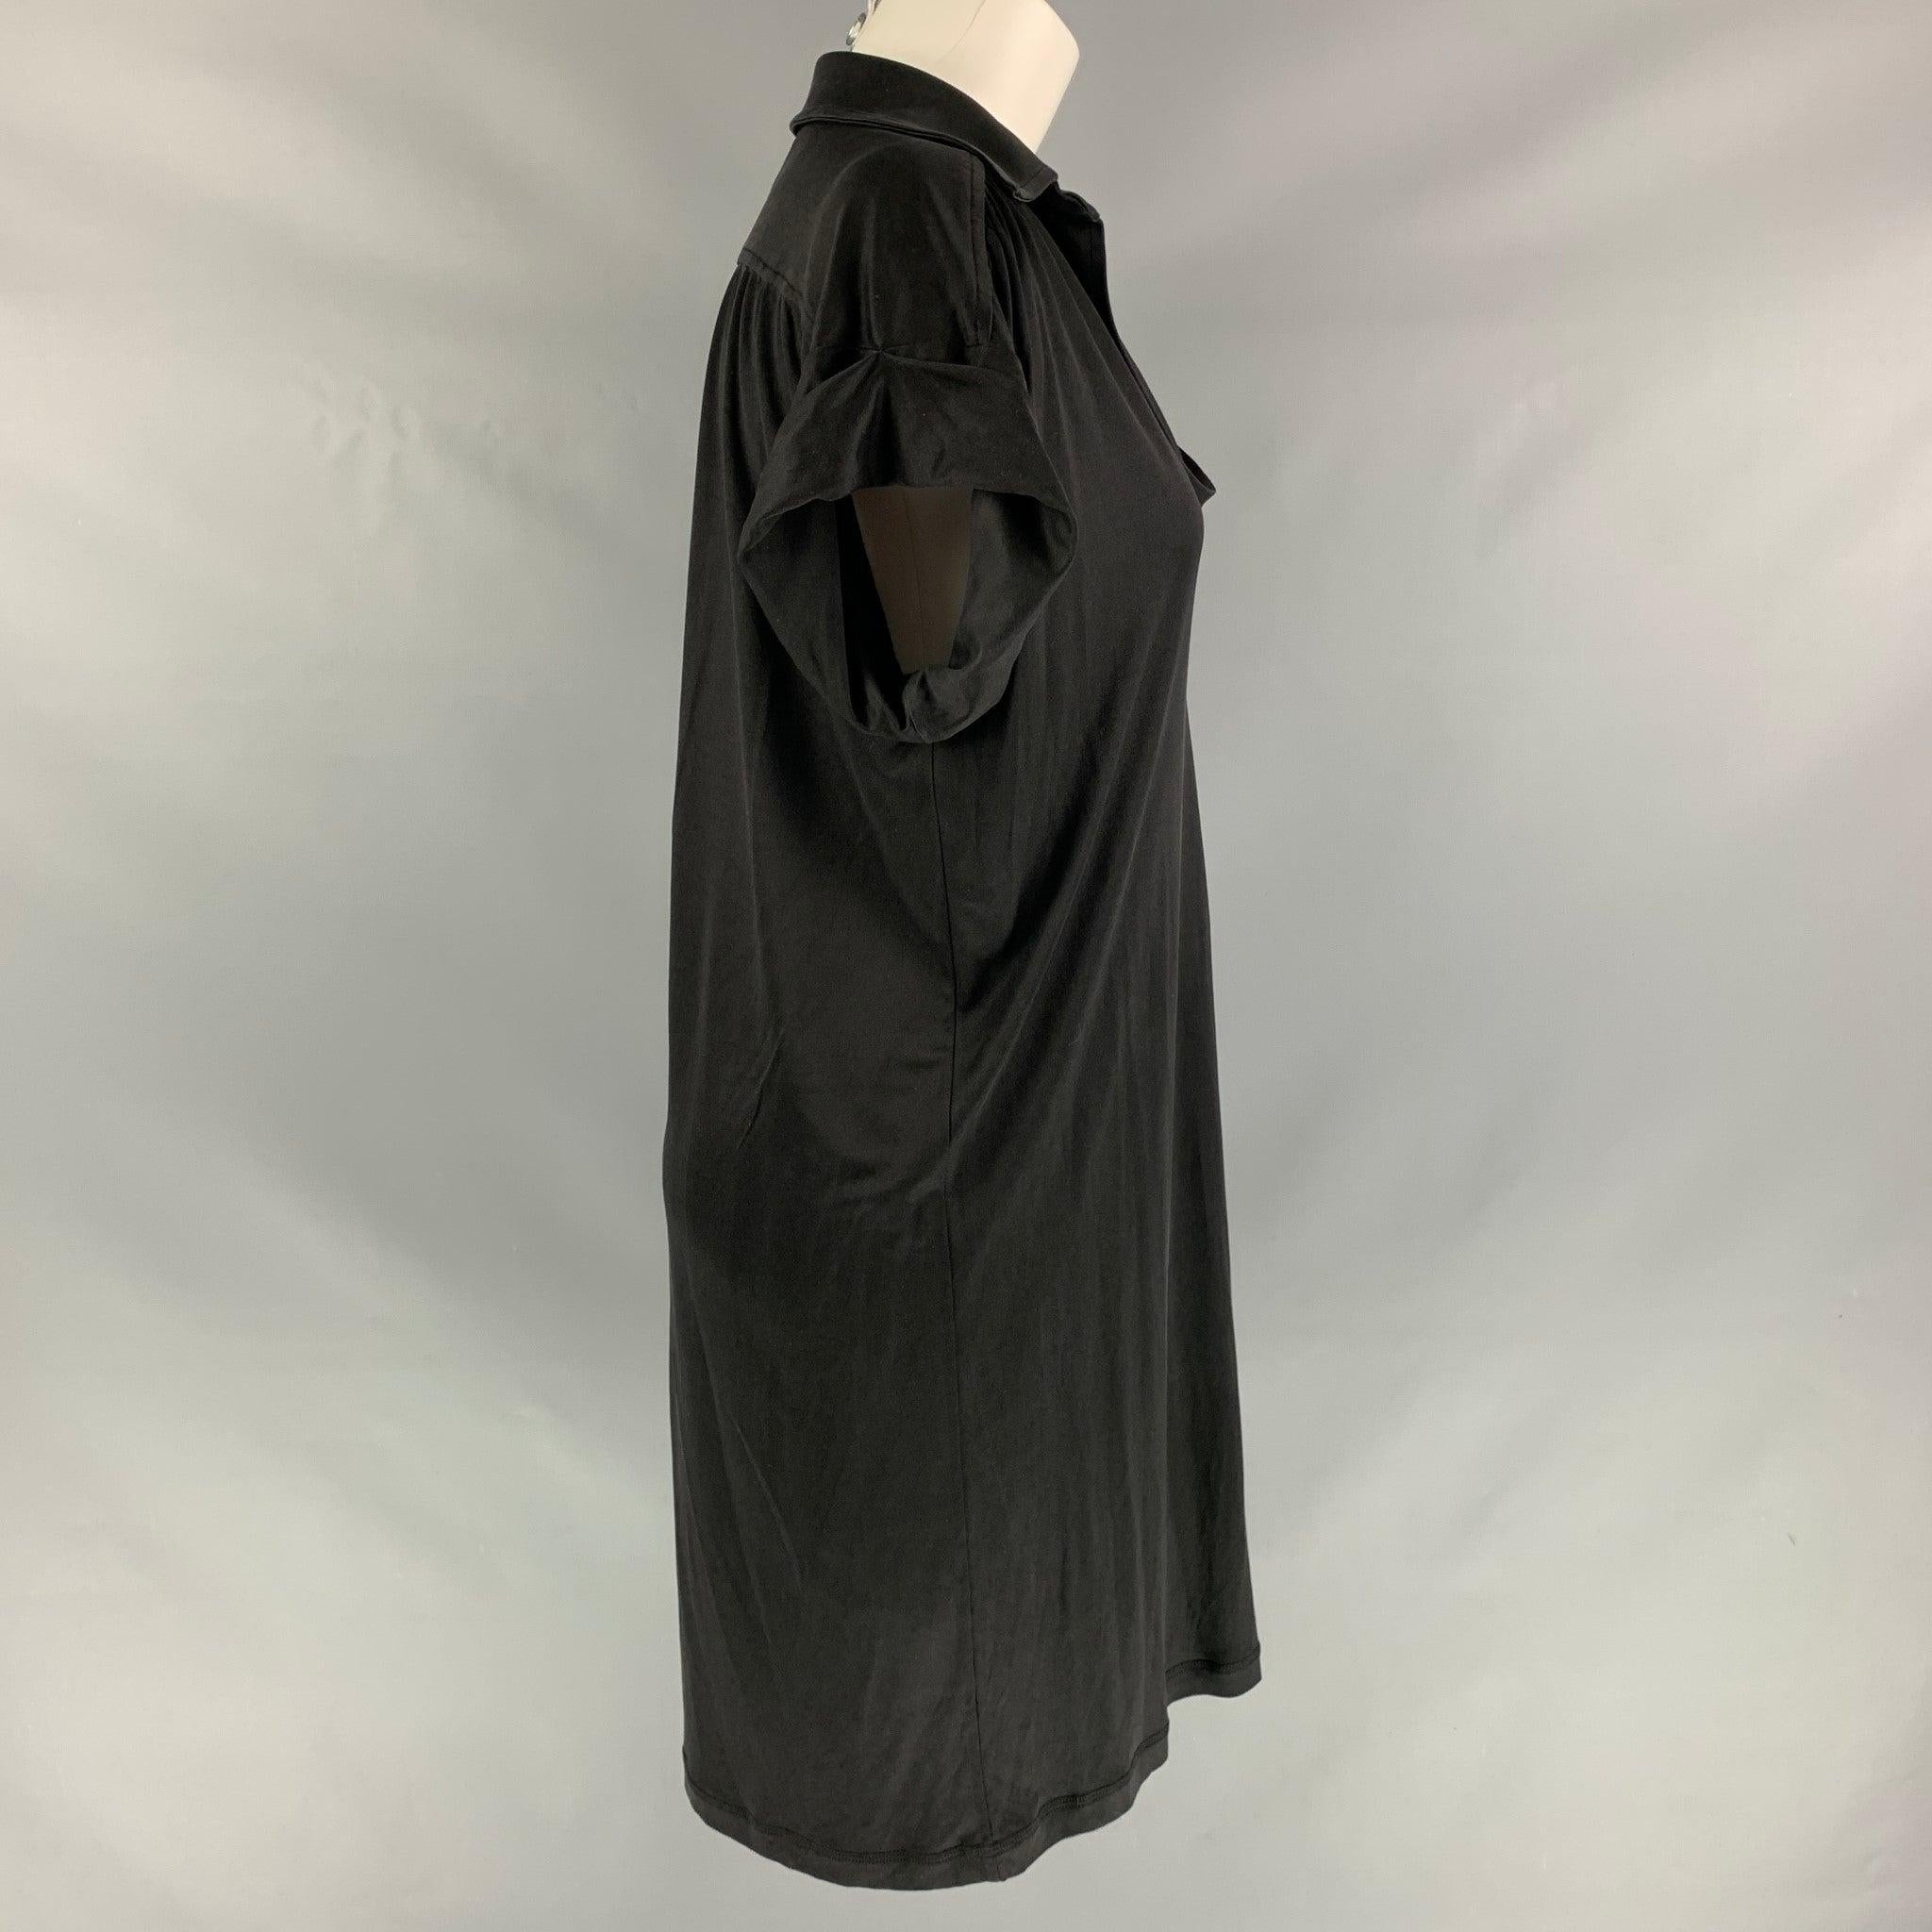 DEREK LAM V-neck t-shirt, bellow knee dress comes in black silk. Made in Italy.Excellent Pre- Owned Conditions. 

Marked:   6 

Measurements: 
 
Shoulder:
19 inches Bust: 46 inches Waist: 46 inches Hip: 46 inches Sleeve: 2 inches Length: 38 inches 
